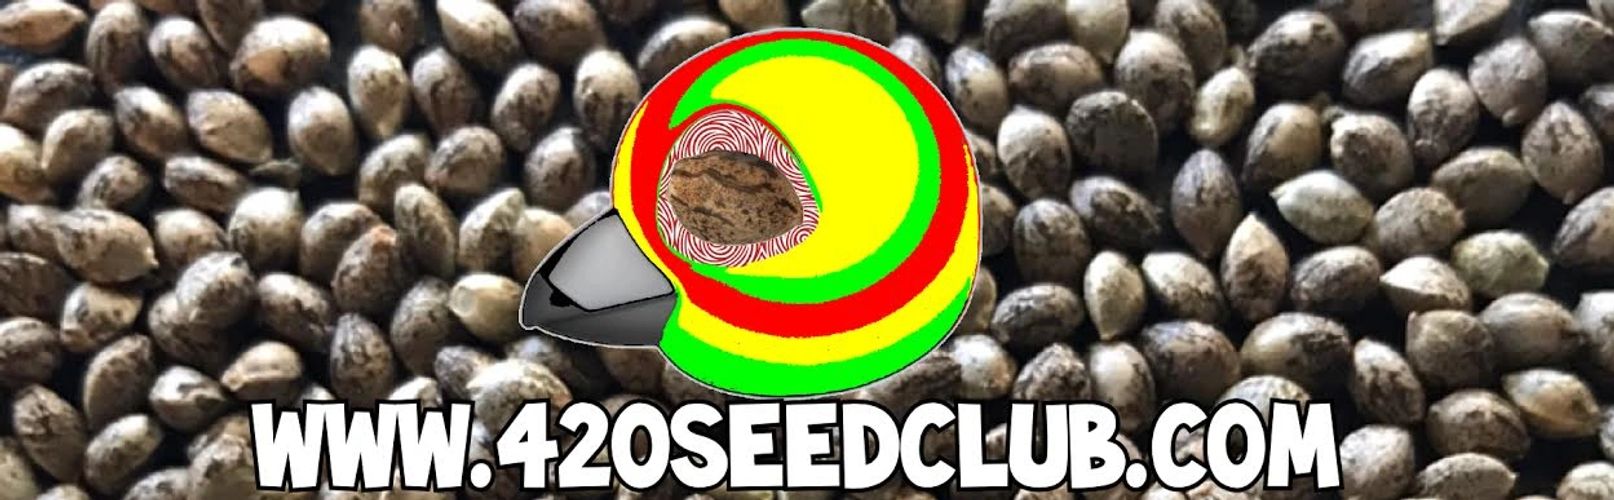 420 SEED CLUB PIC FOR 420SEEDCLUB.COM OFFERING EXOTIC ( HEMP ) CANNABIS SATIVA SEEDS  & PRODUCTS